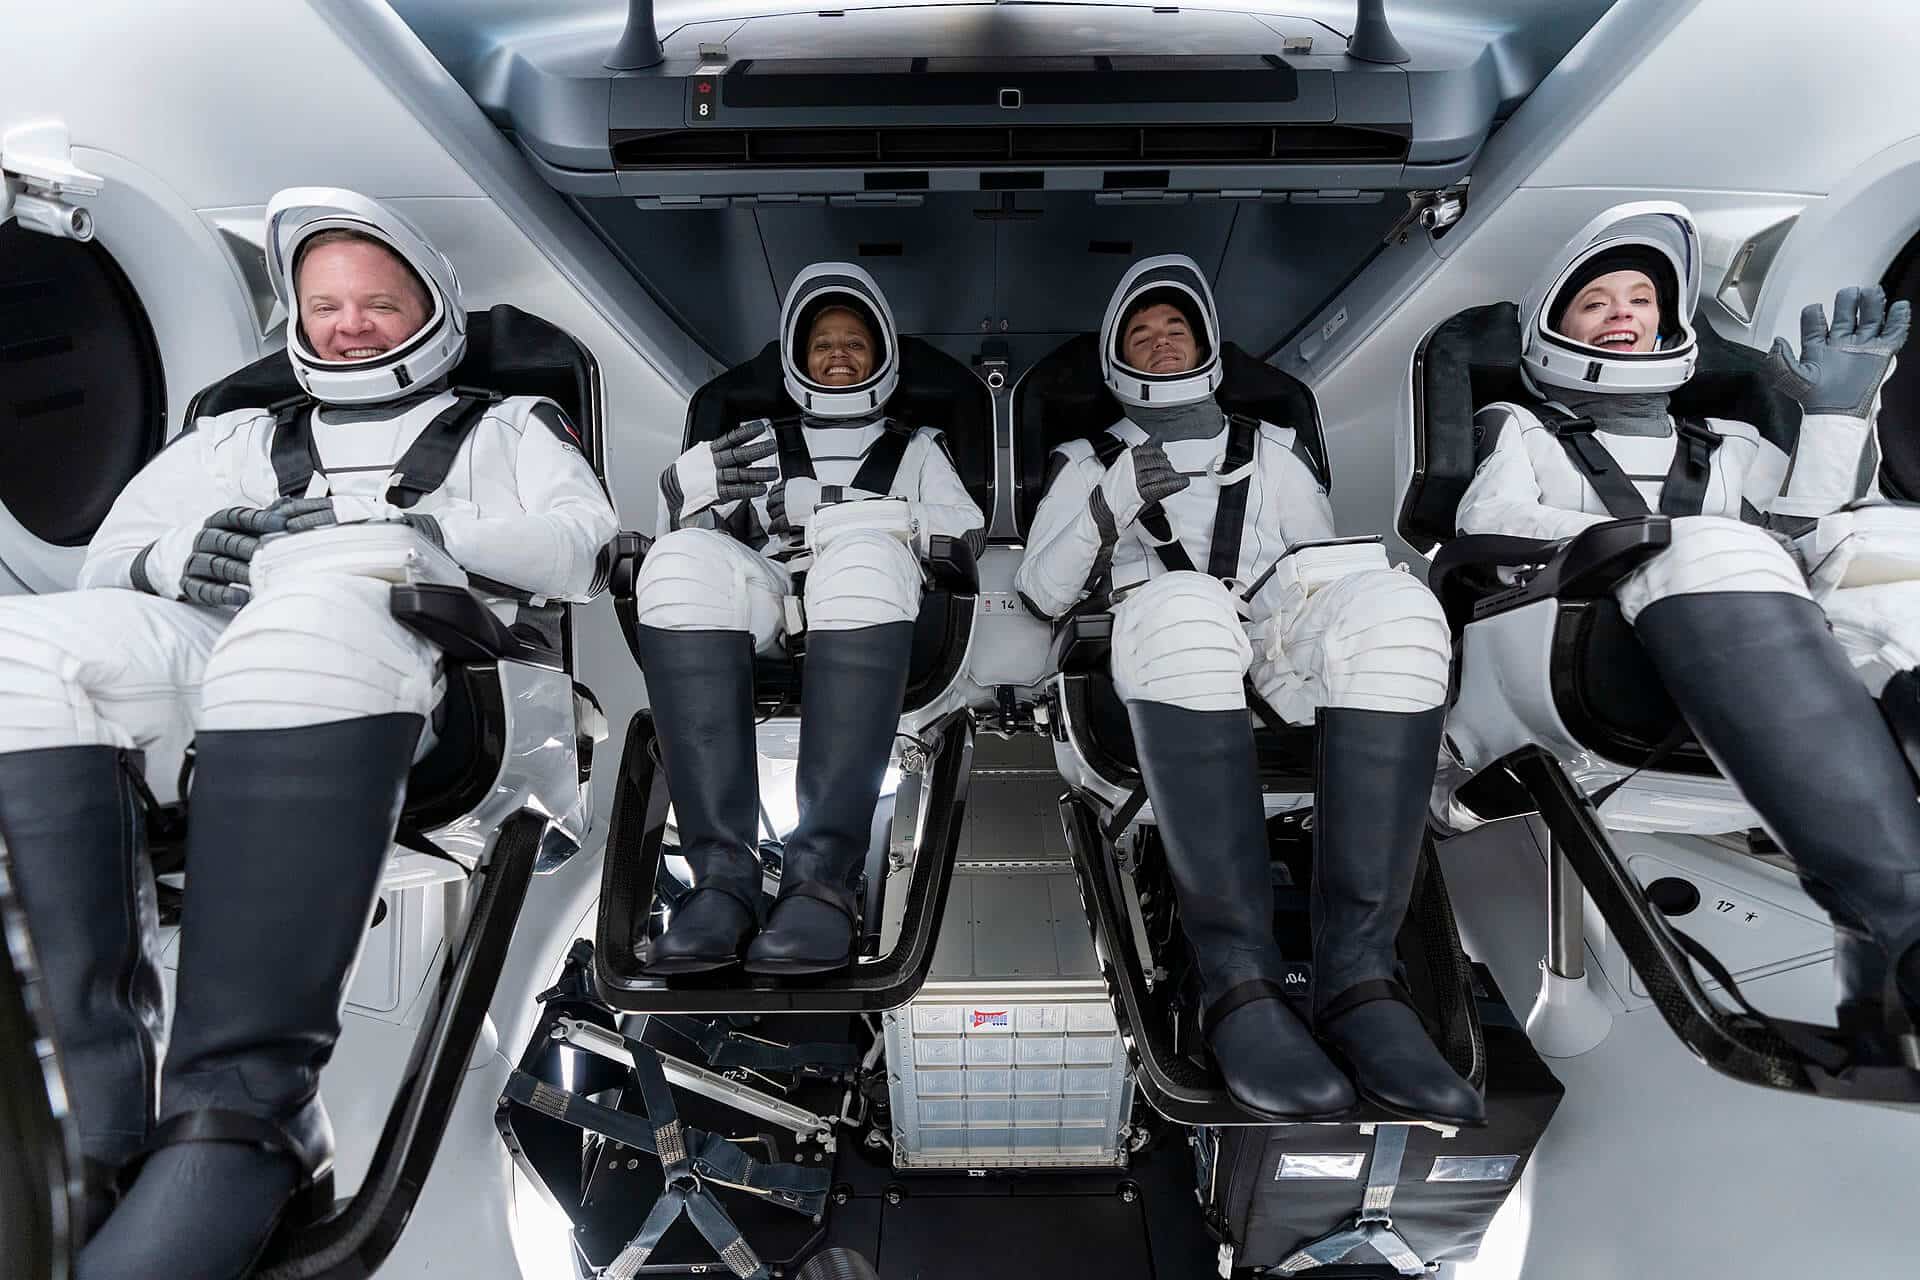 The crew of Inspiration4 participate in a launch day rehearsal on September 13, 2021 : (L-R) Sembroski, Proctor, Isaacman and Arceneaux. צילום: SpaceX